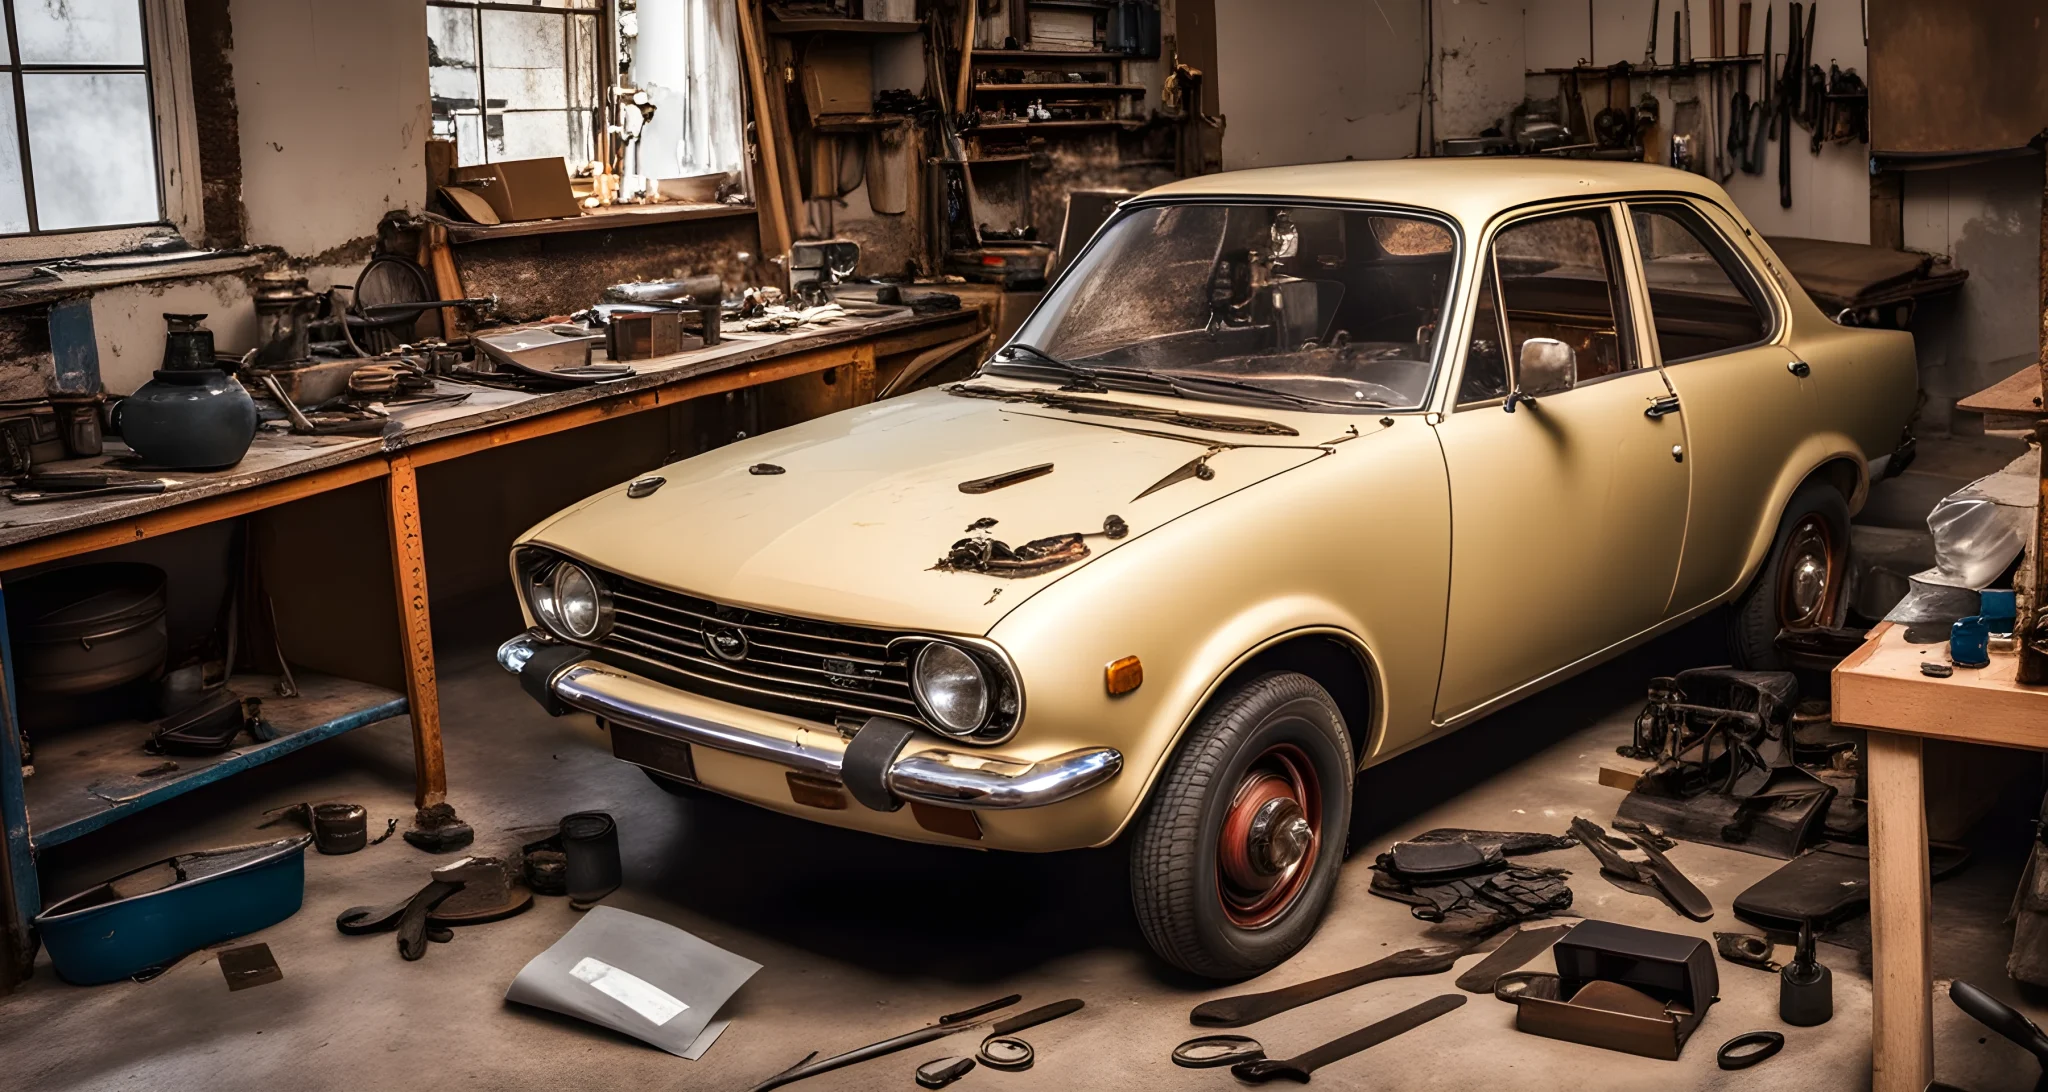 The image shows a vintage Mazda car being restored, with tools, parts, and manuals scattered around the workspace.